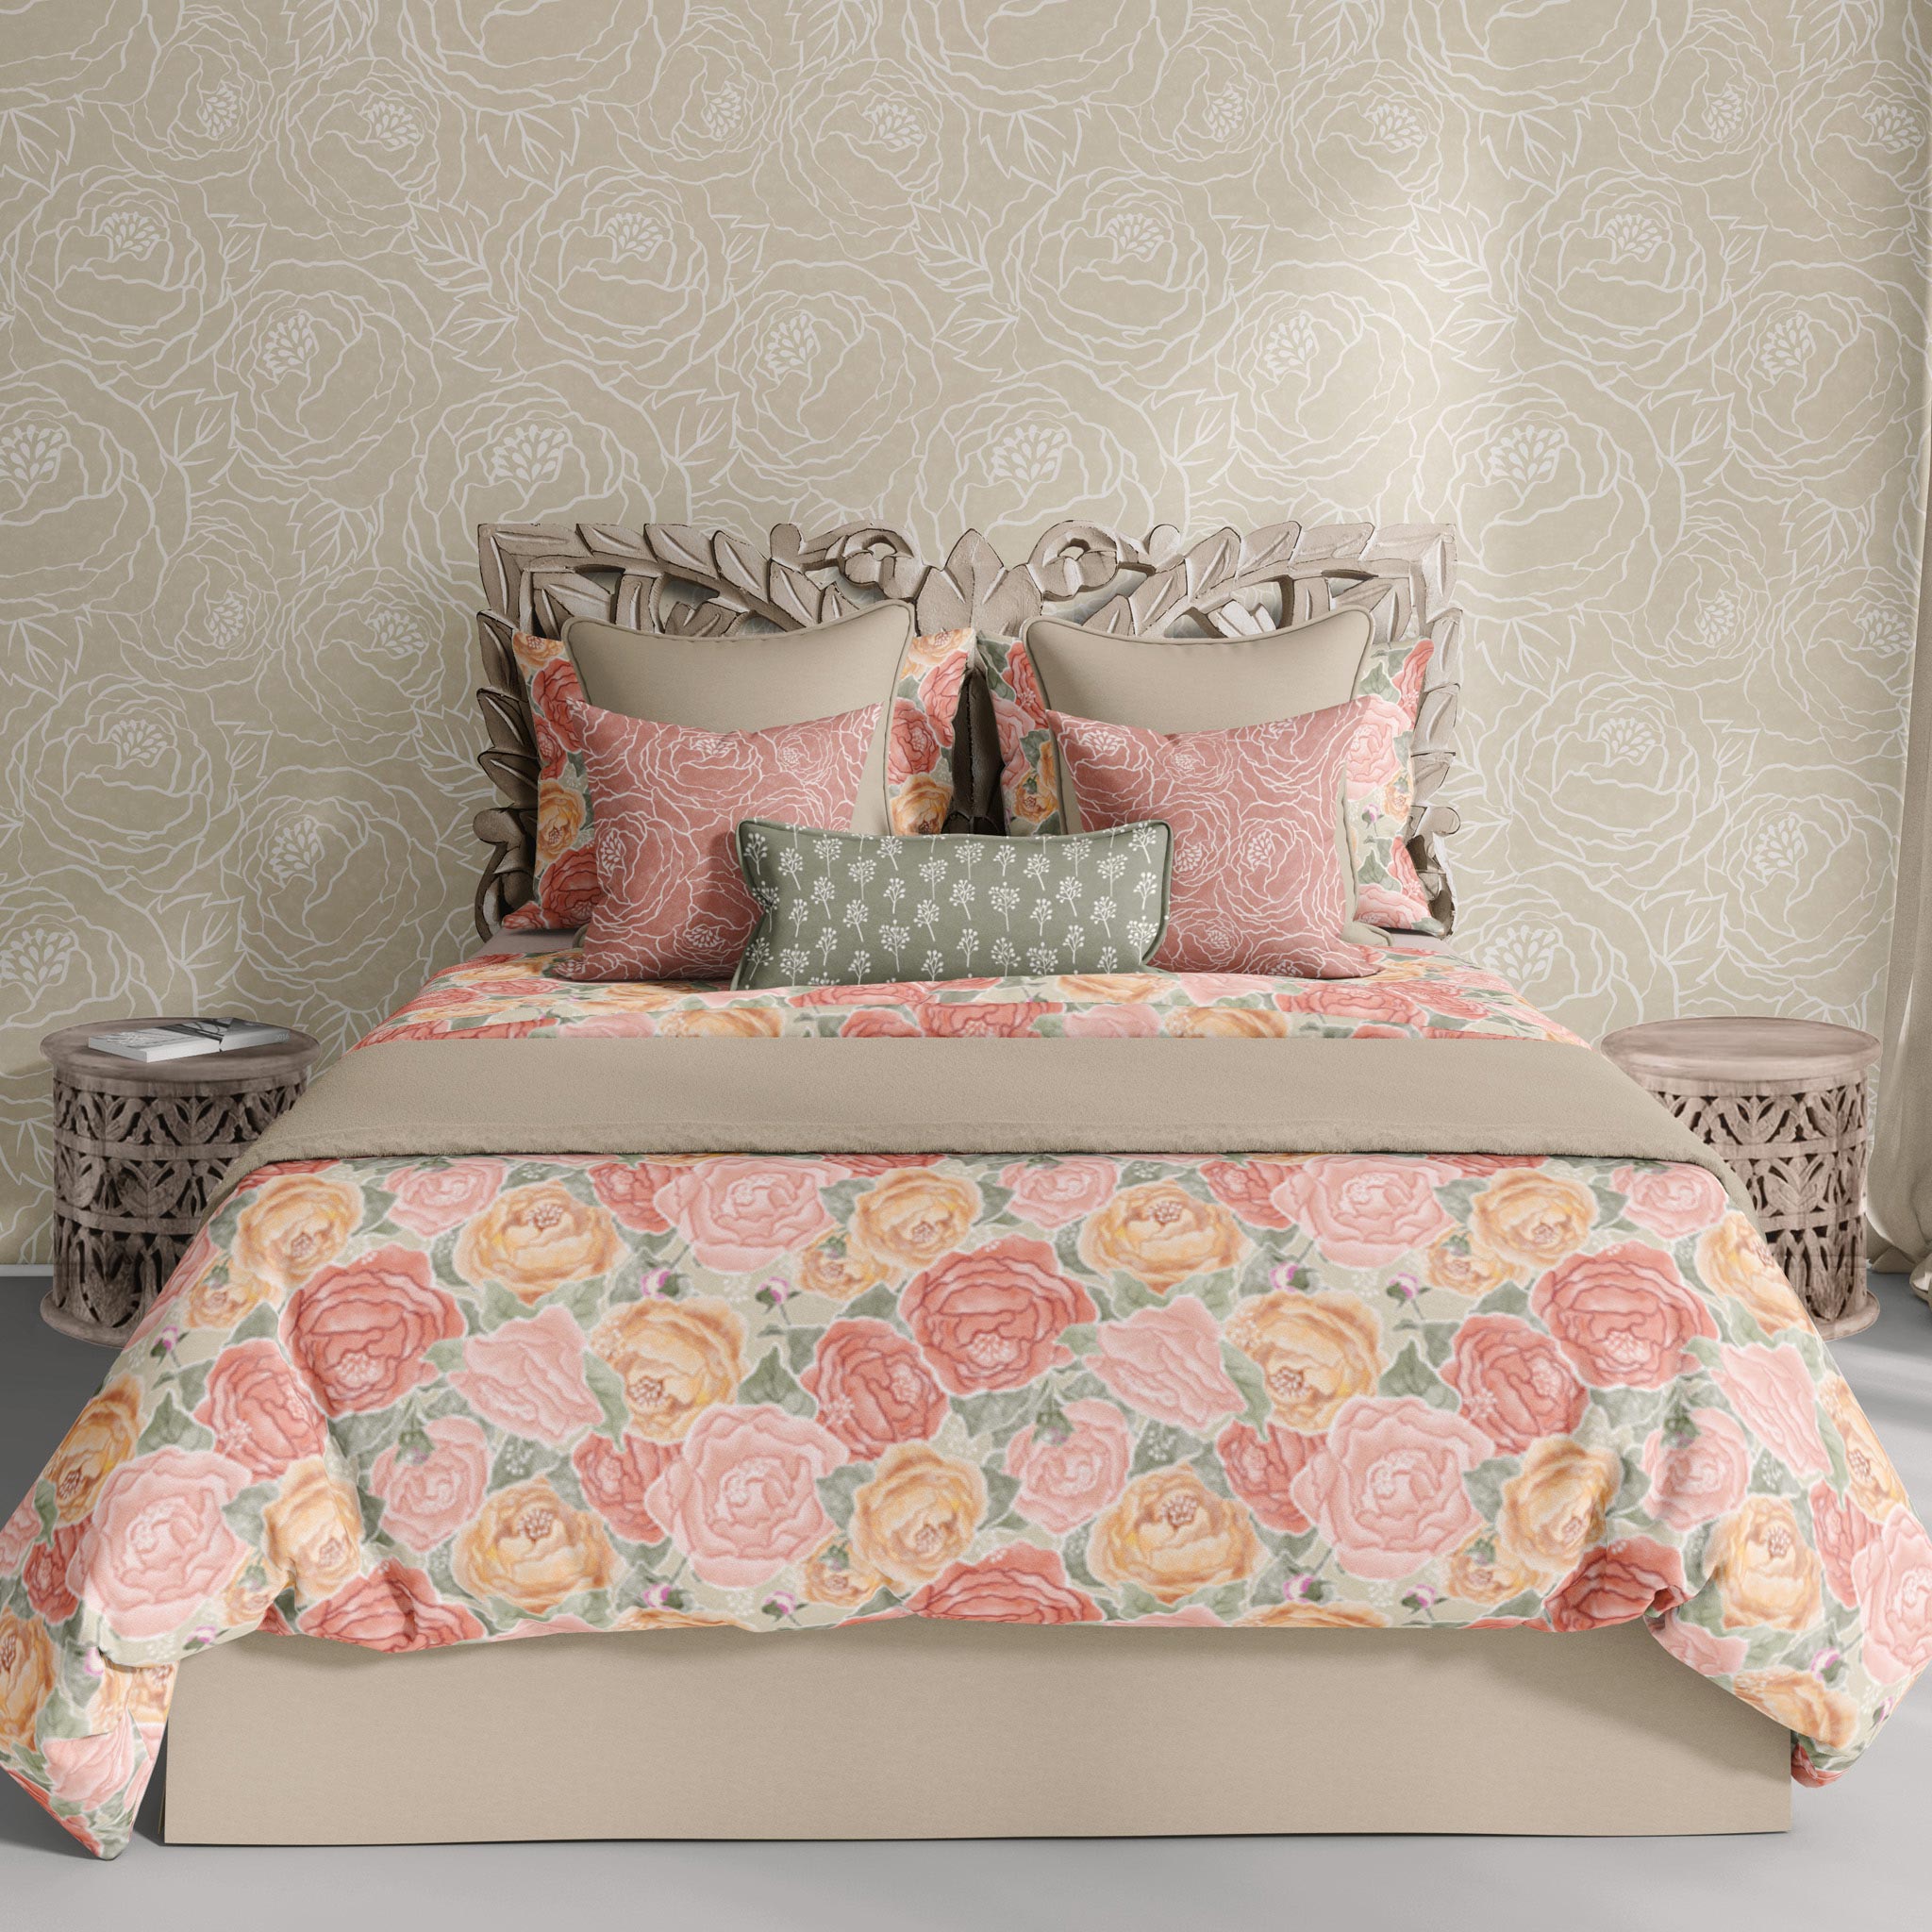 Pretty in Peony Bedding Collection with Amber Background. Comes in Twin, Full/Queen, and King/Cal. King sizes